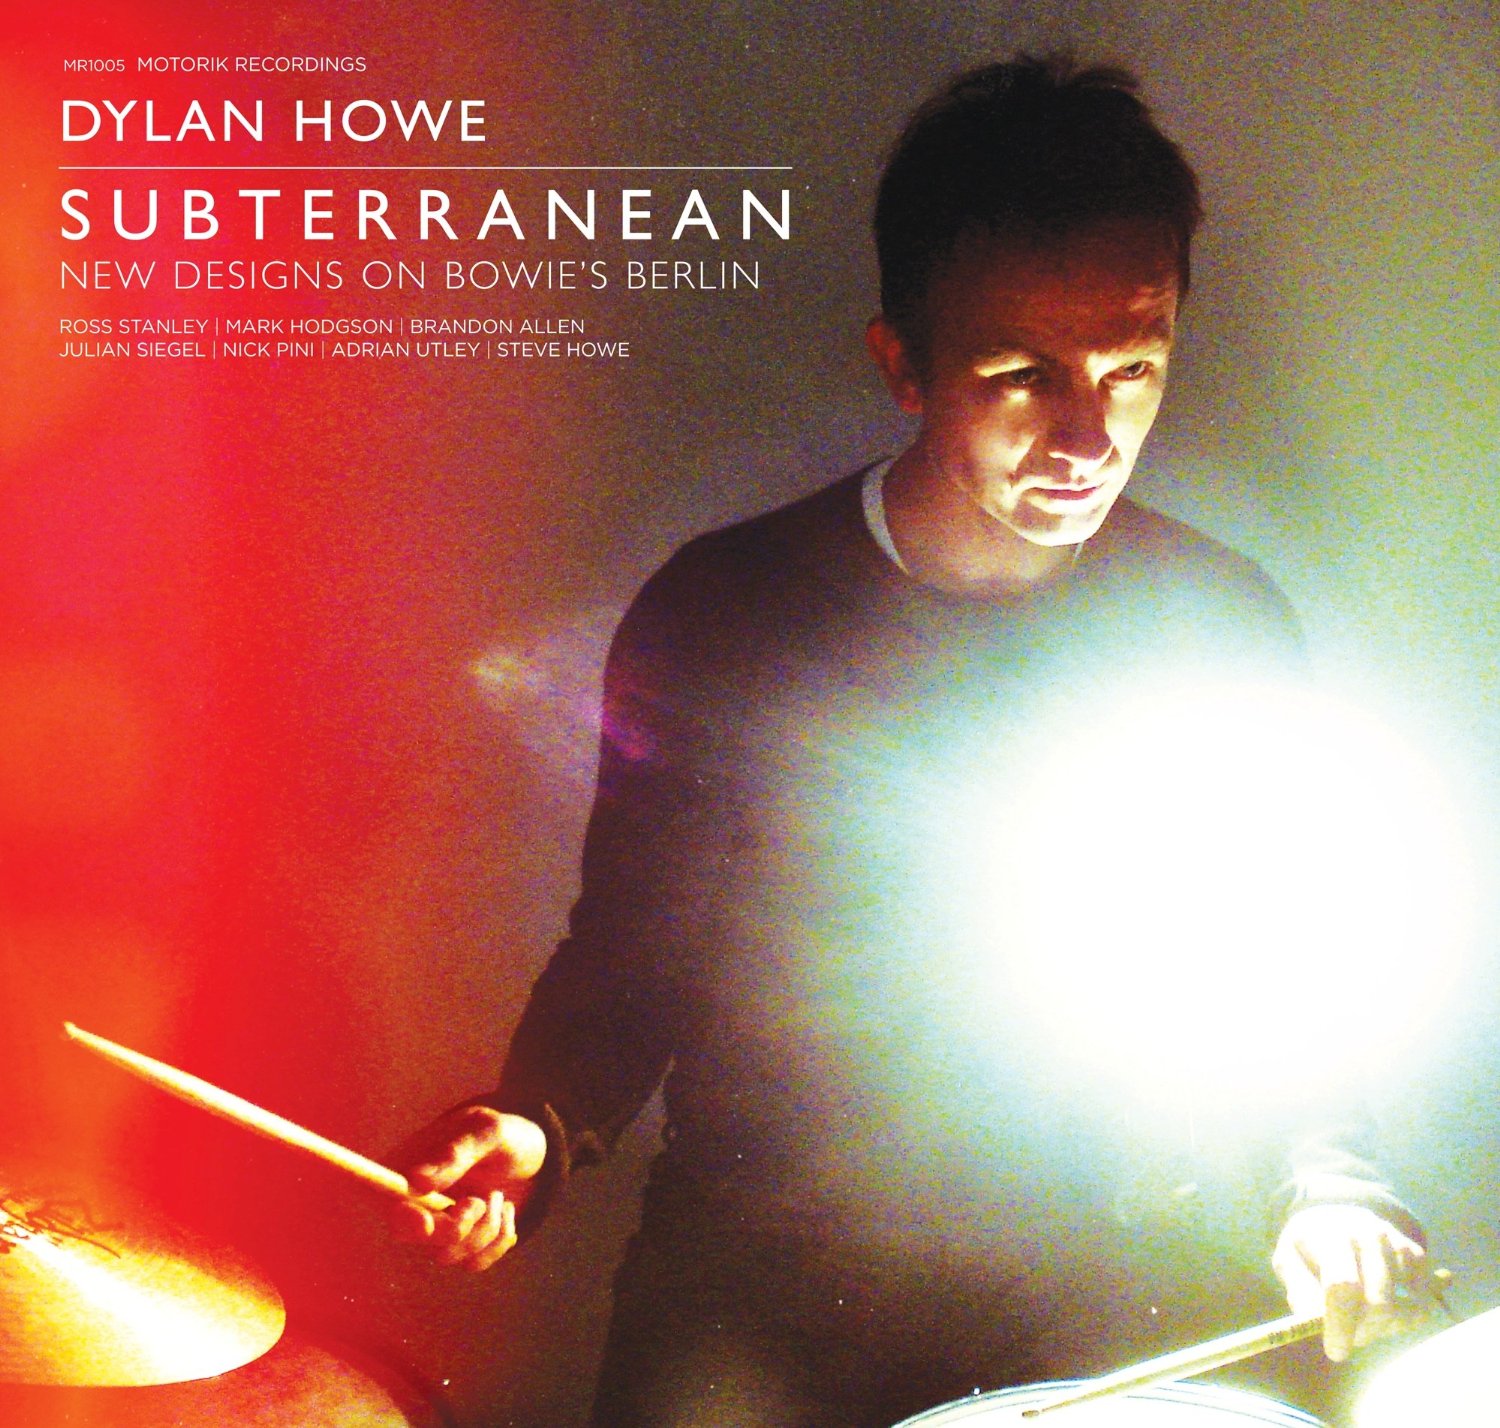 DYLAN HOWE - Subterranean - New Designs on Bowie's Berlin cover 